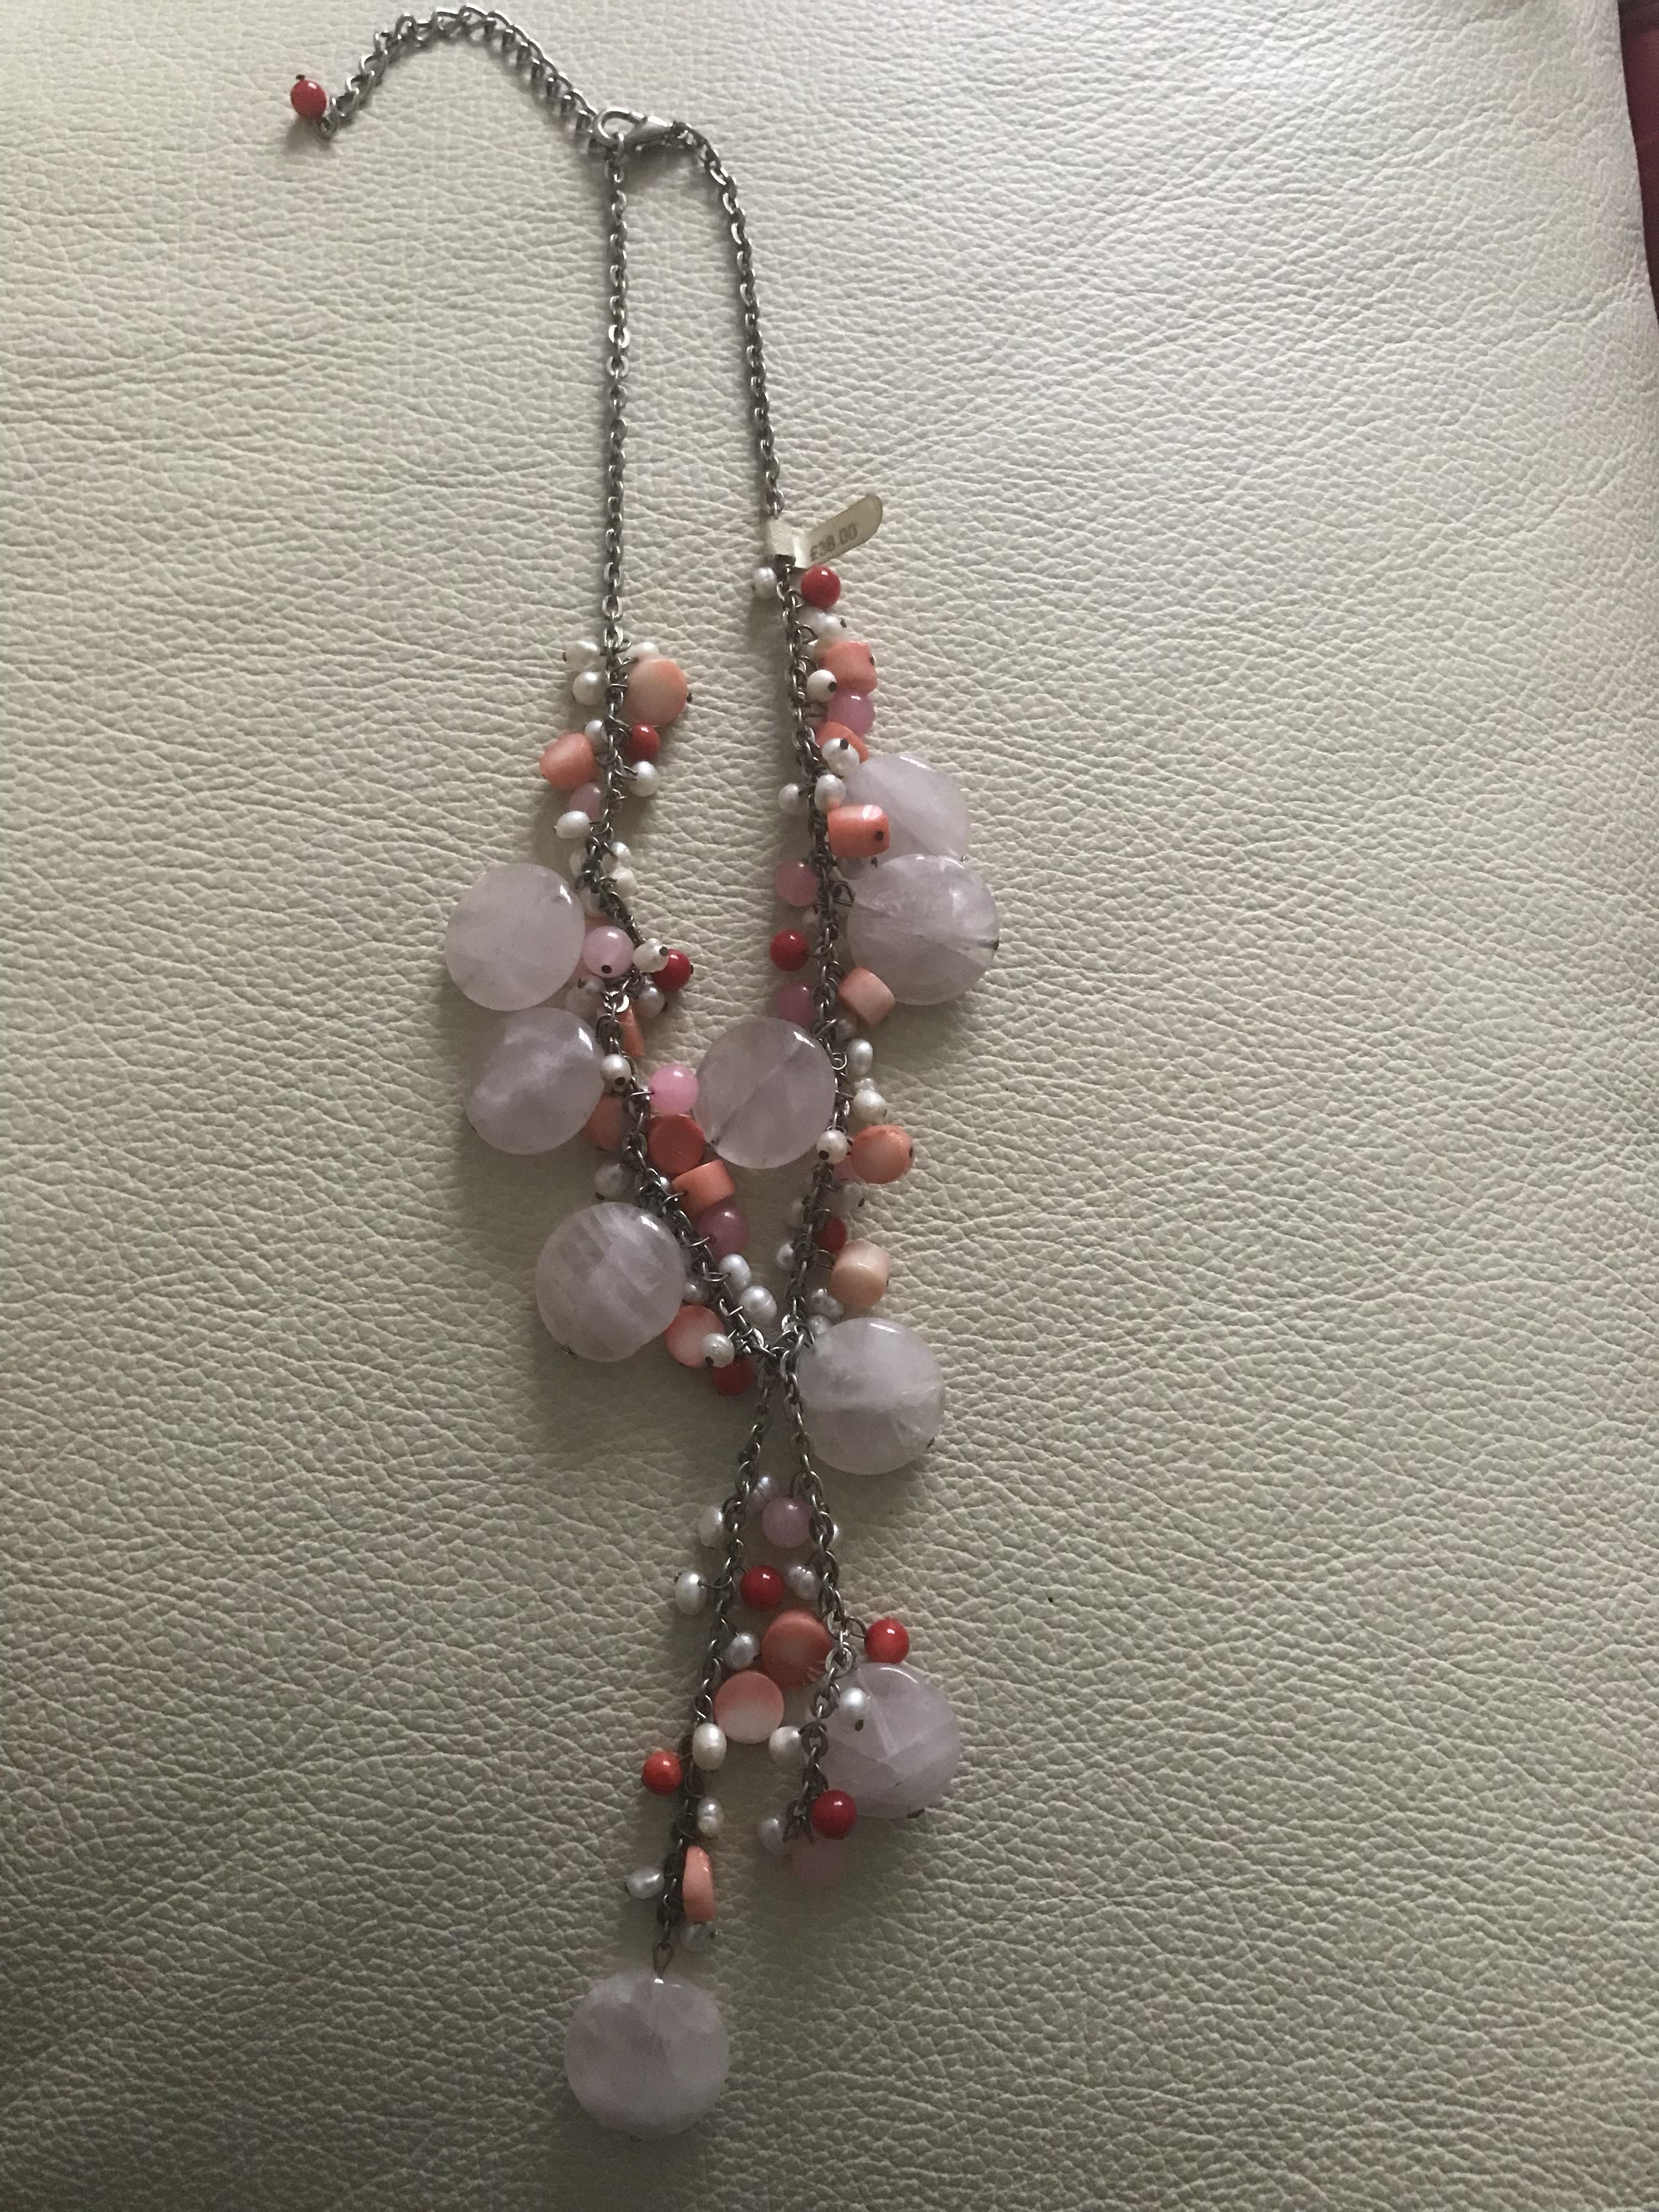 Butler & Wilson Rose Quartz, Pearl and Coral Bead Necklace - Image 5 of 5